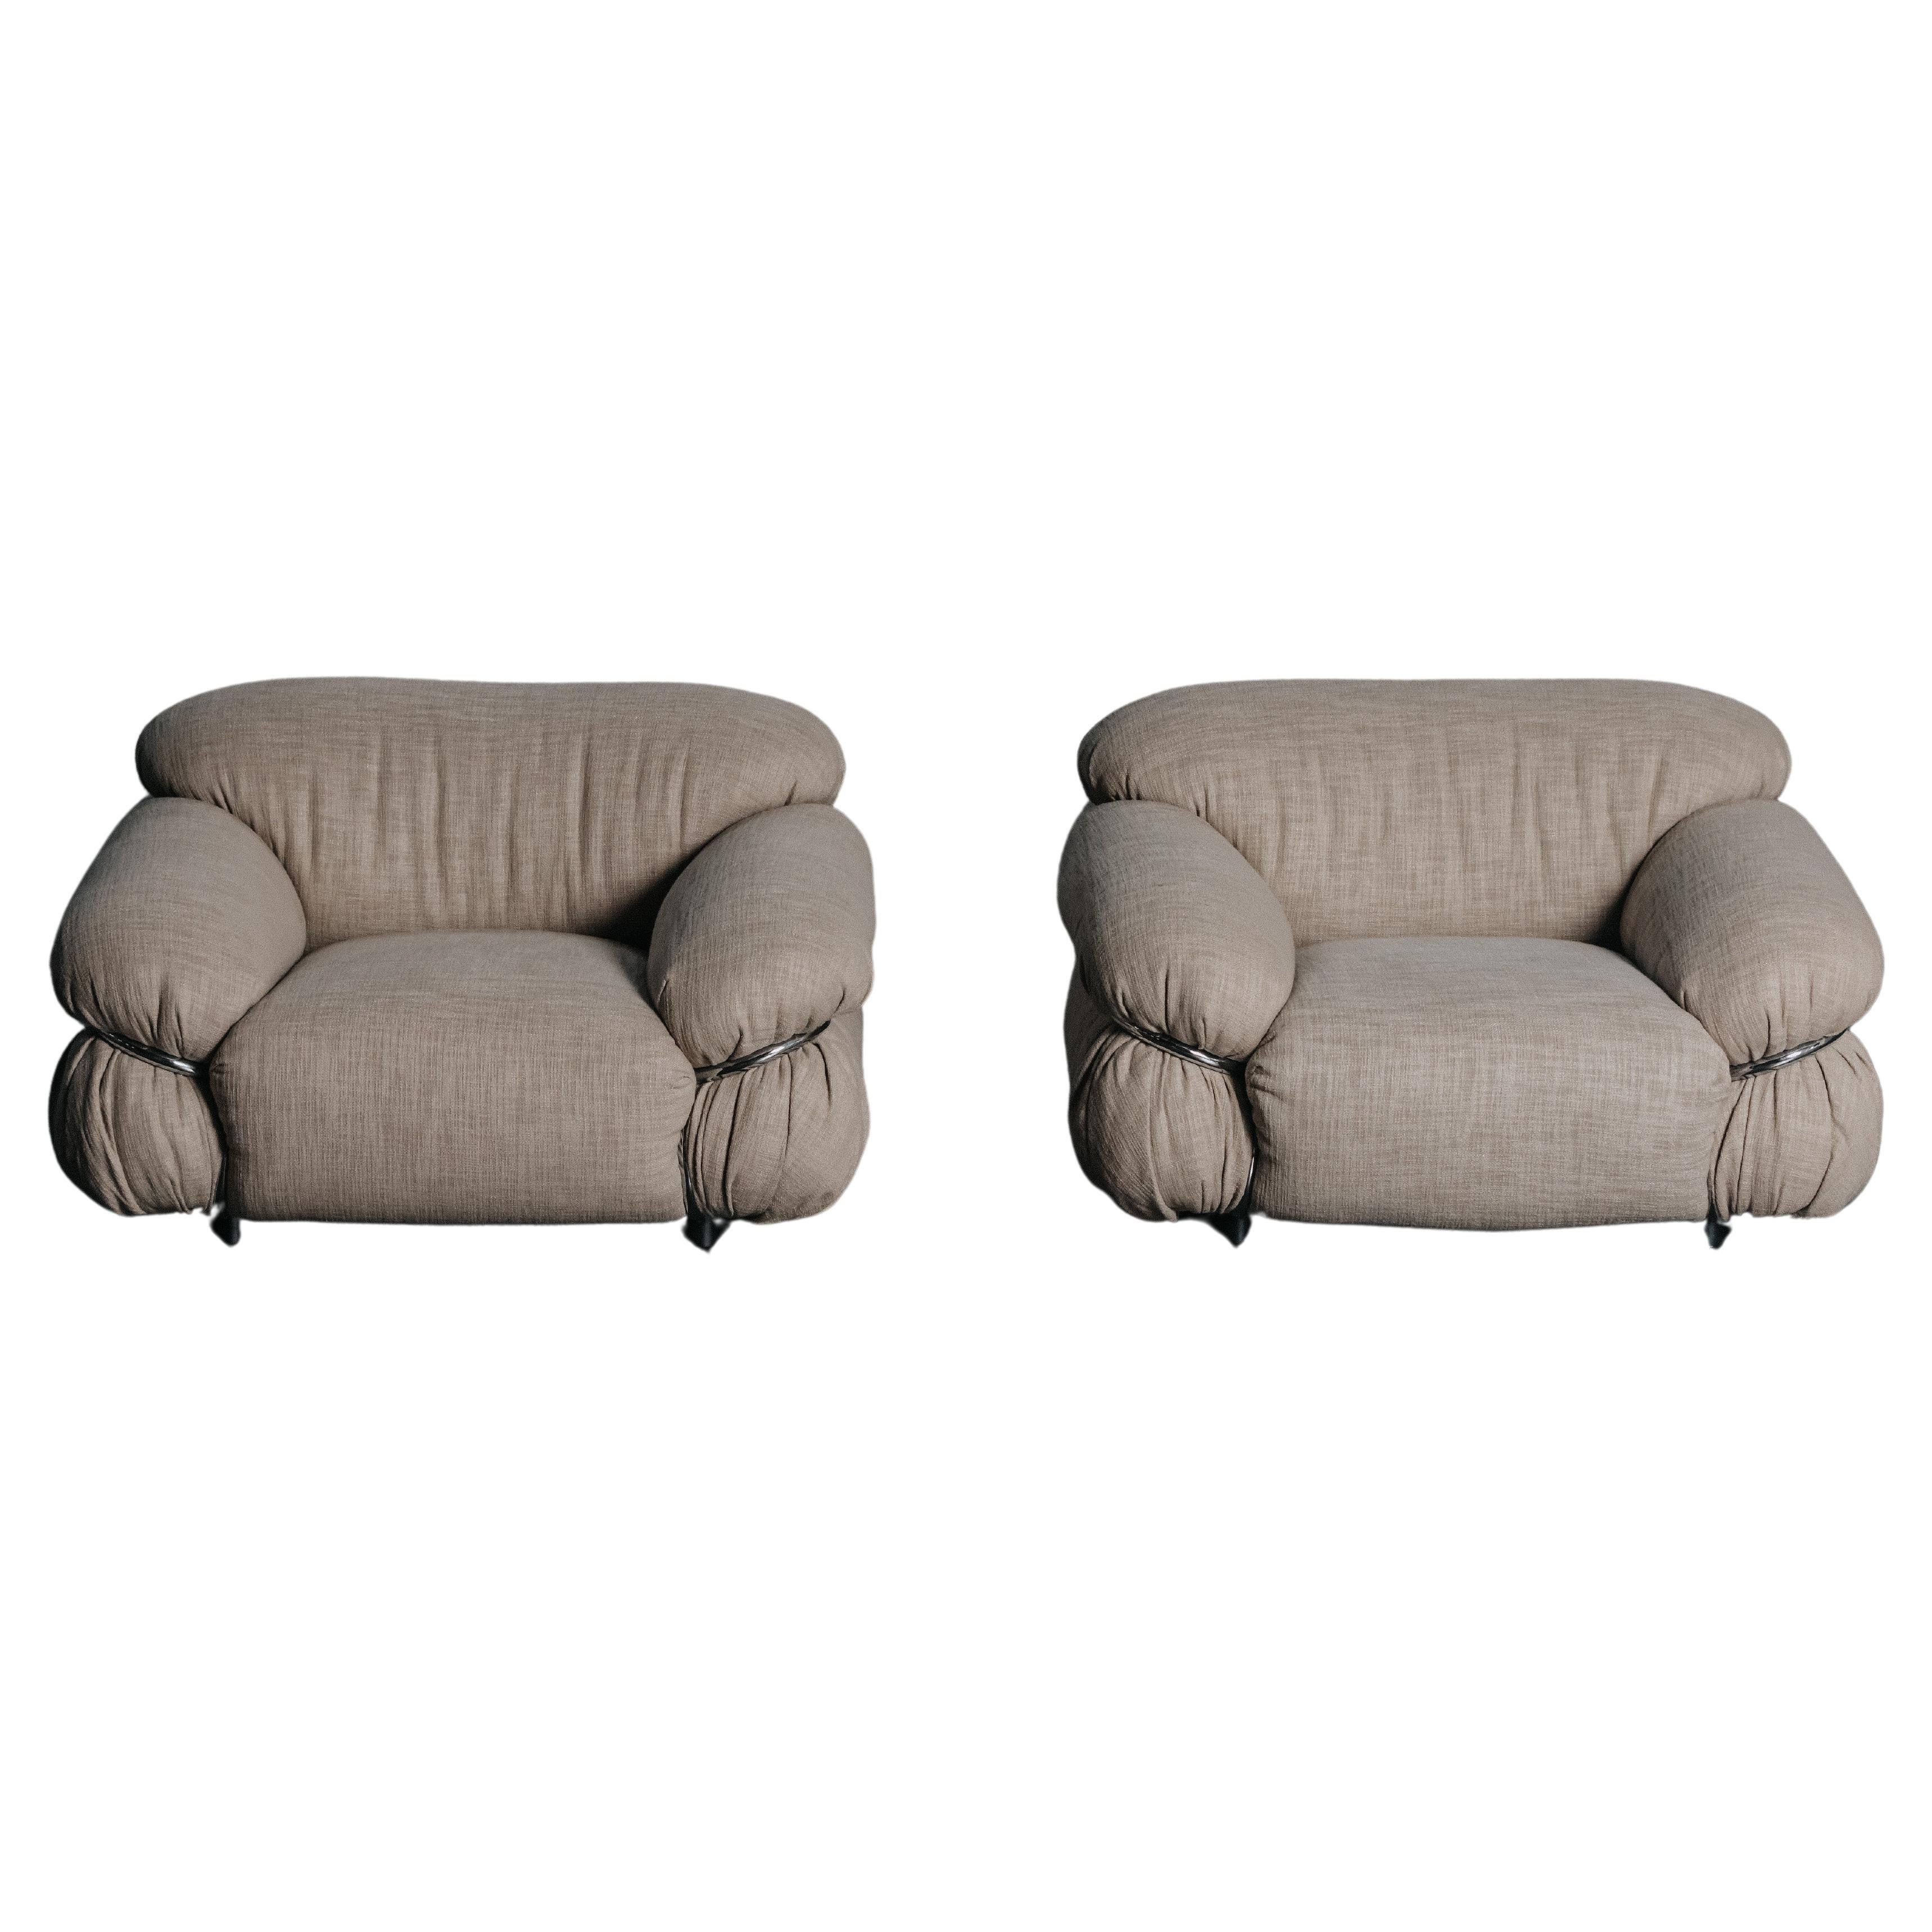 Vintage Pair Of Lounge Chairs by Gianfranco Frattini for Cassina, 1972 For Sale